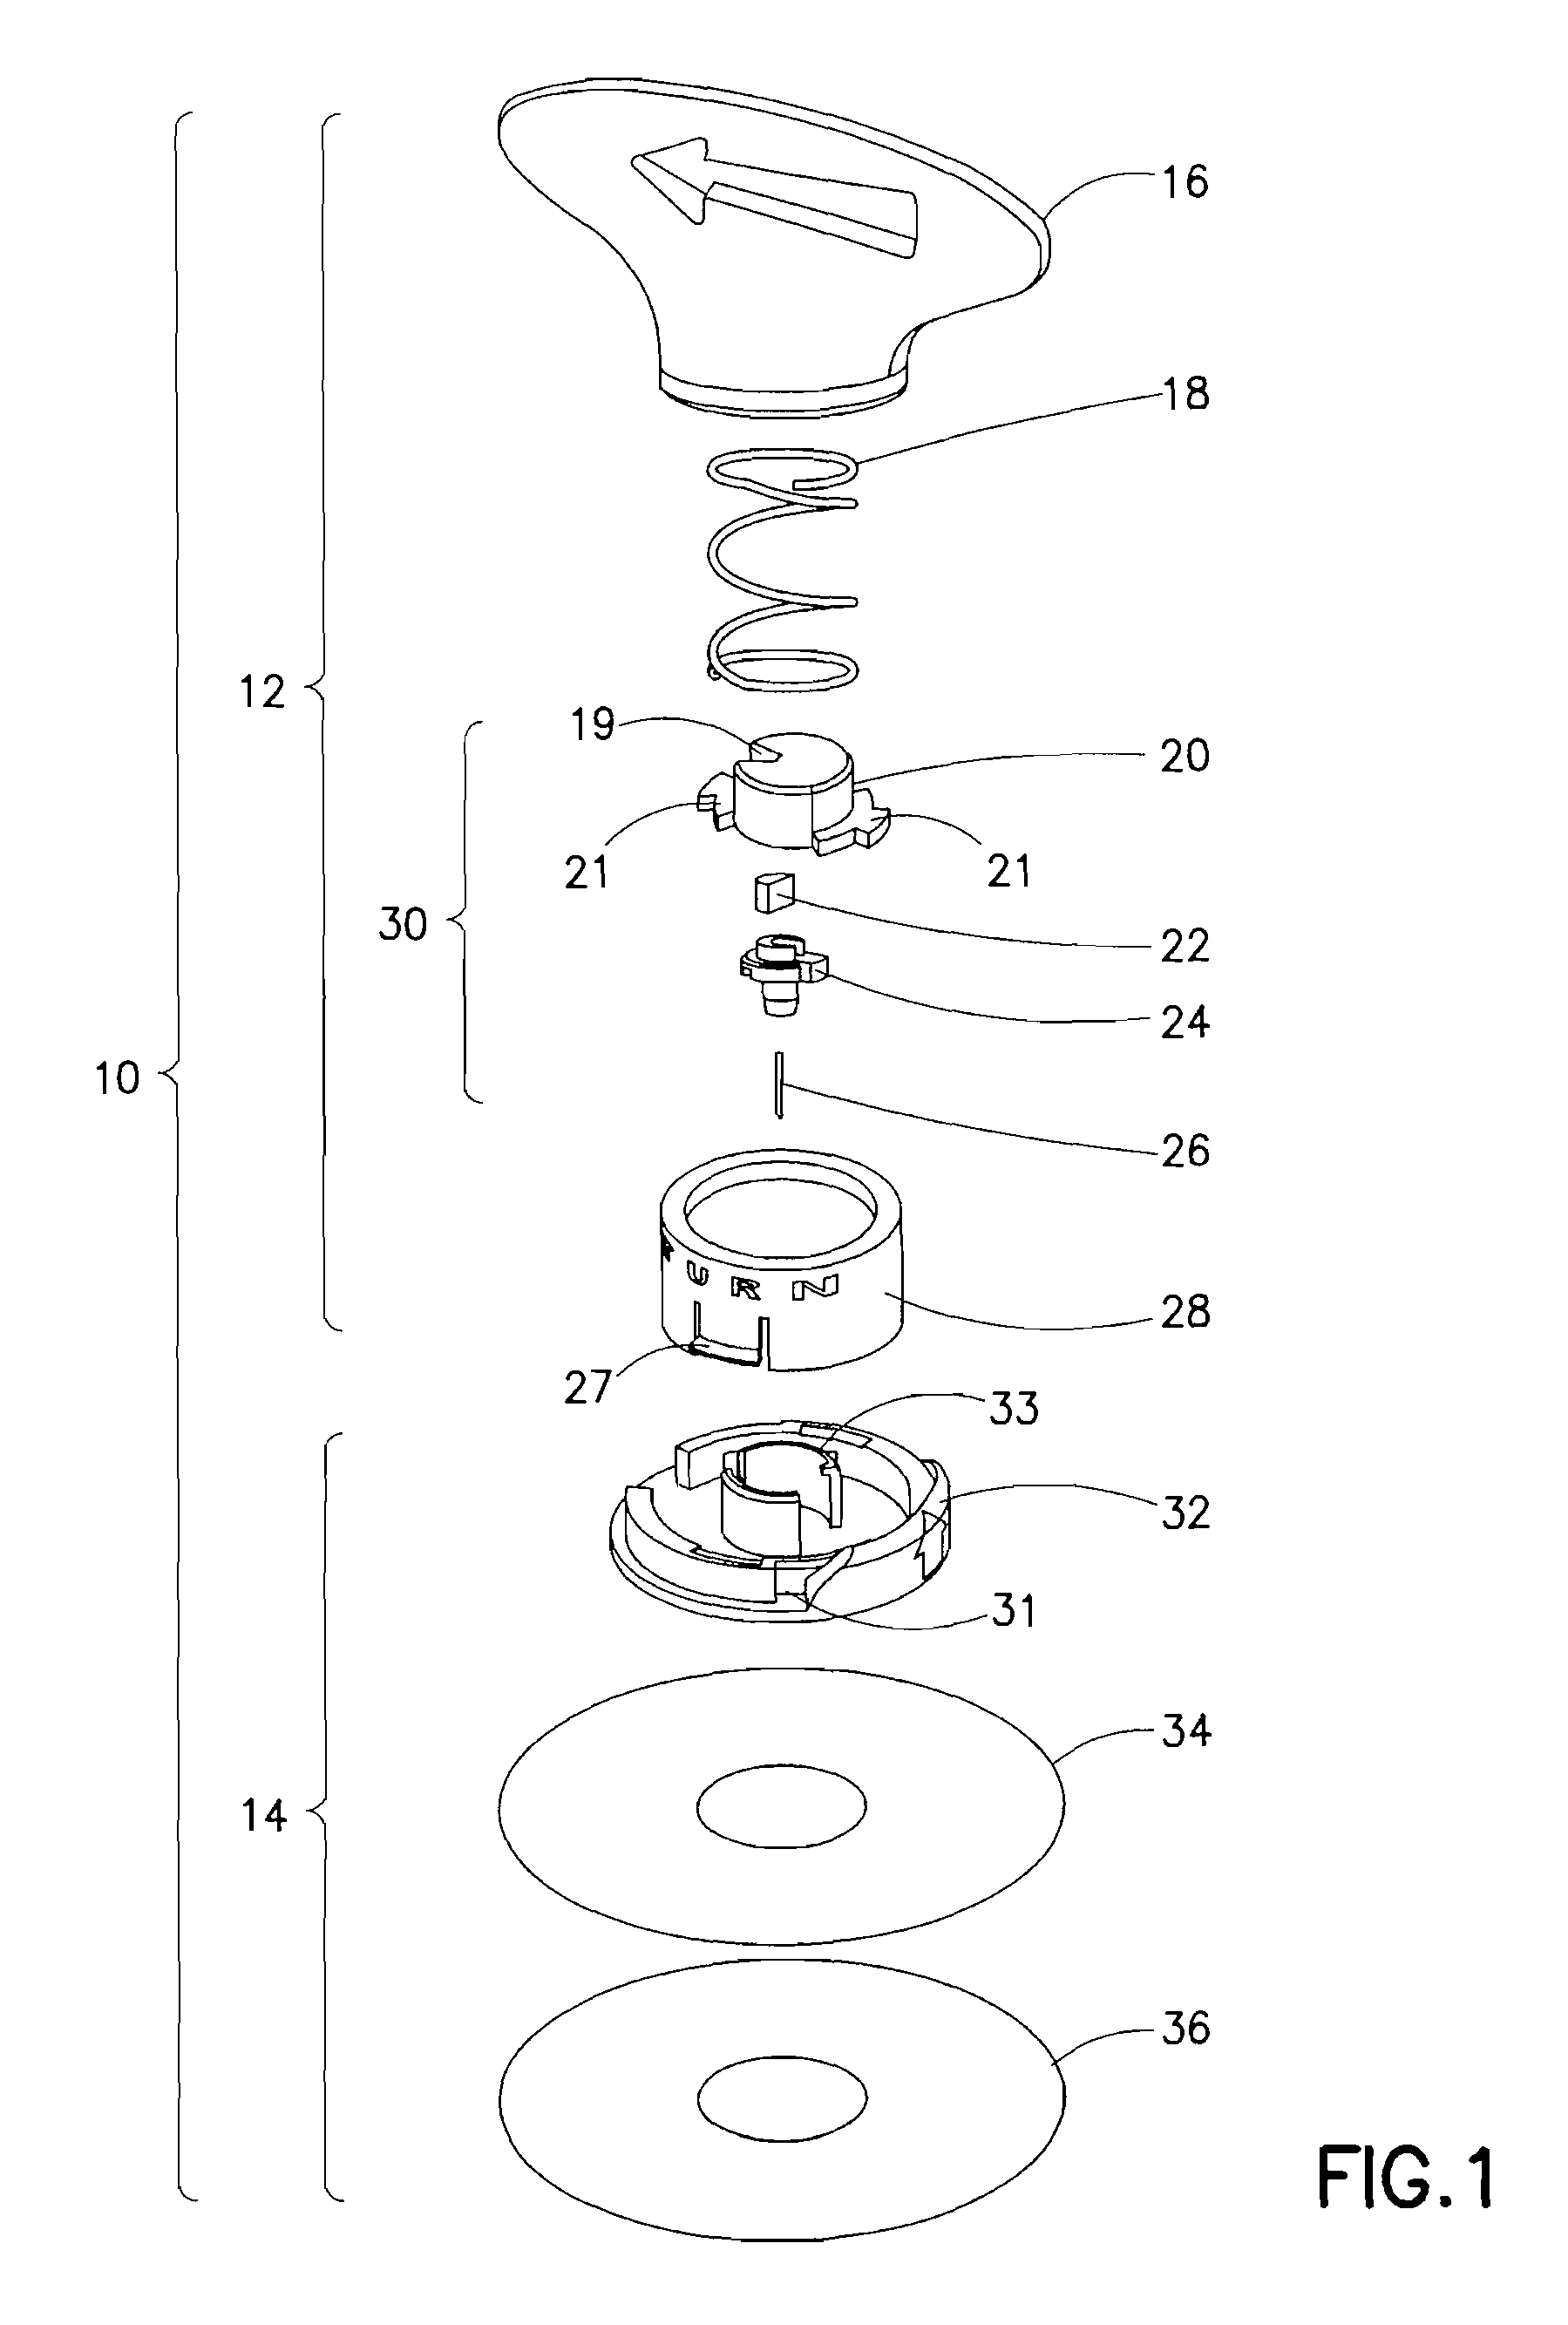 Insulin pump dermal infusion set having partially integrated mechanized cannula insertion with disposable activation portion